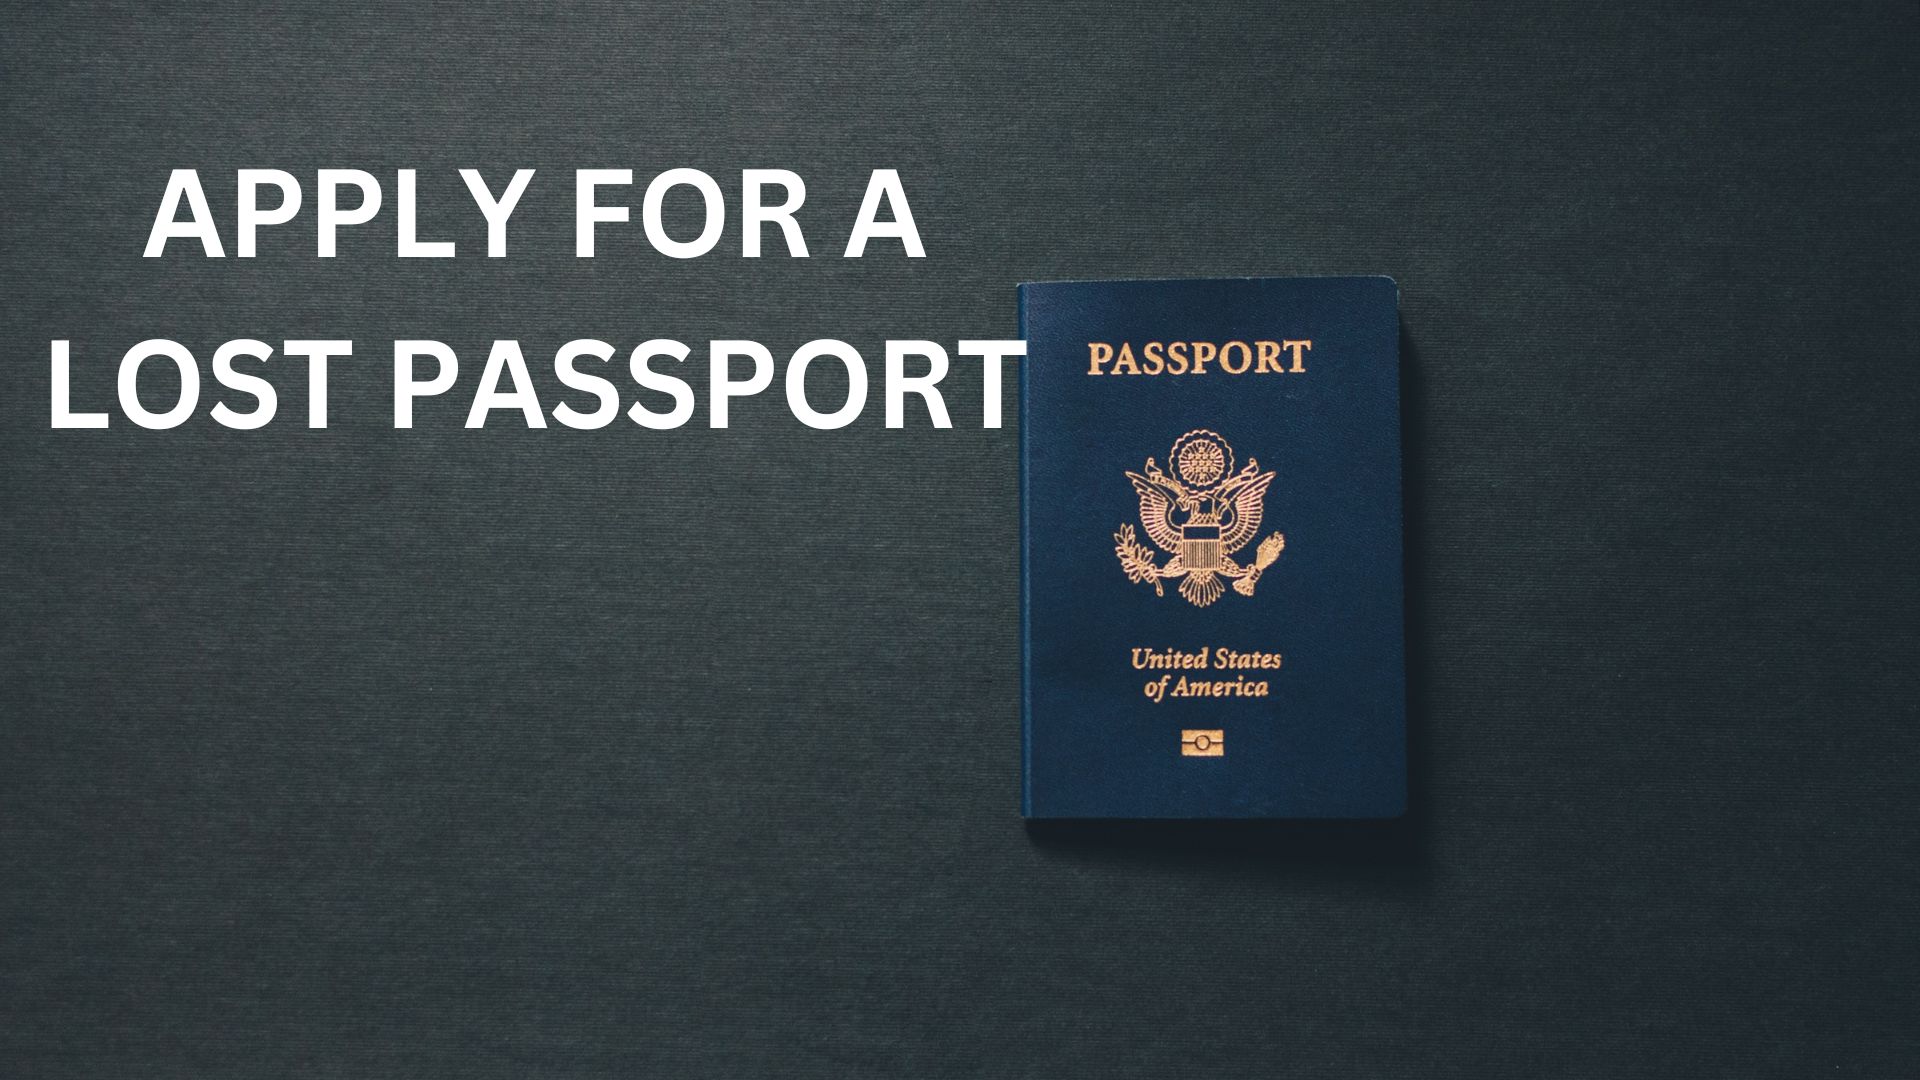 APPLY FOR A LOST PASSPORT